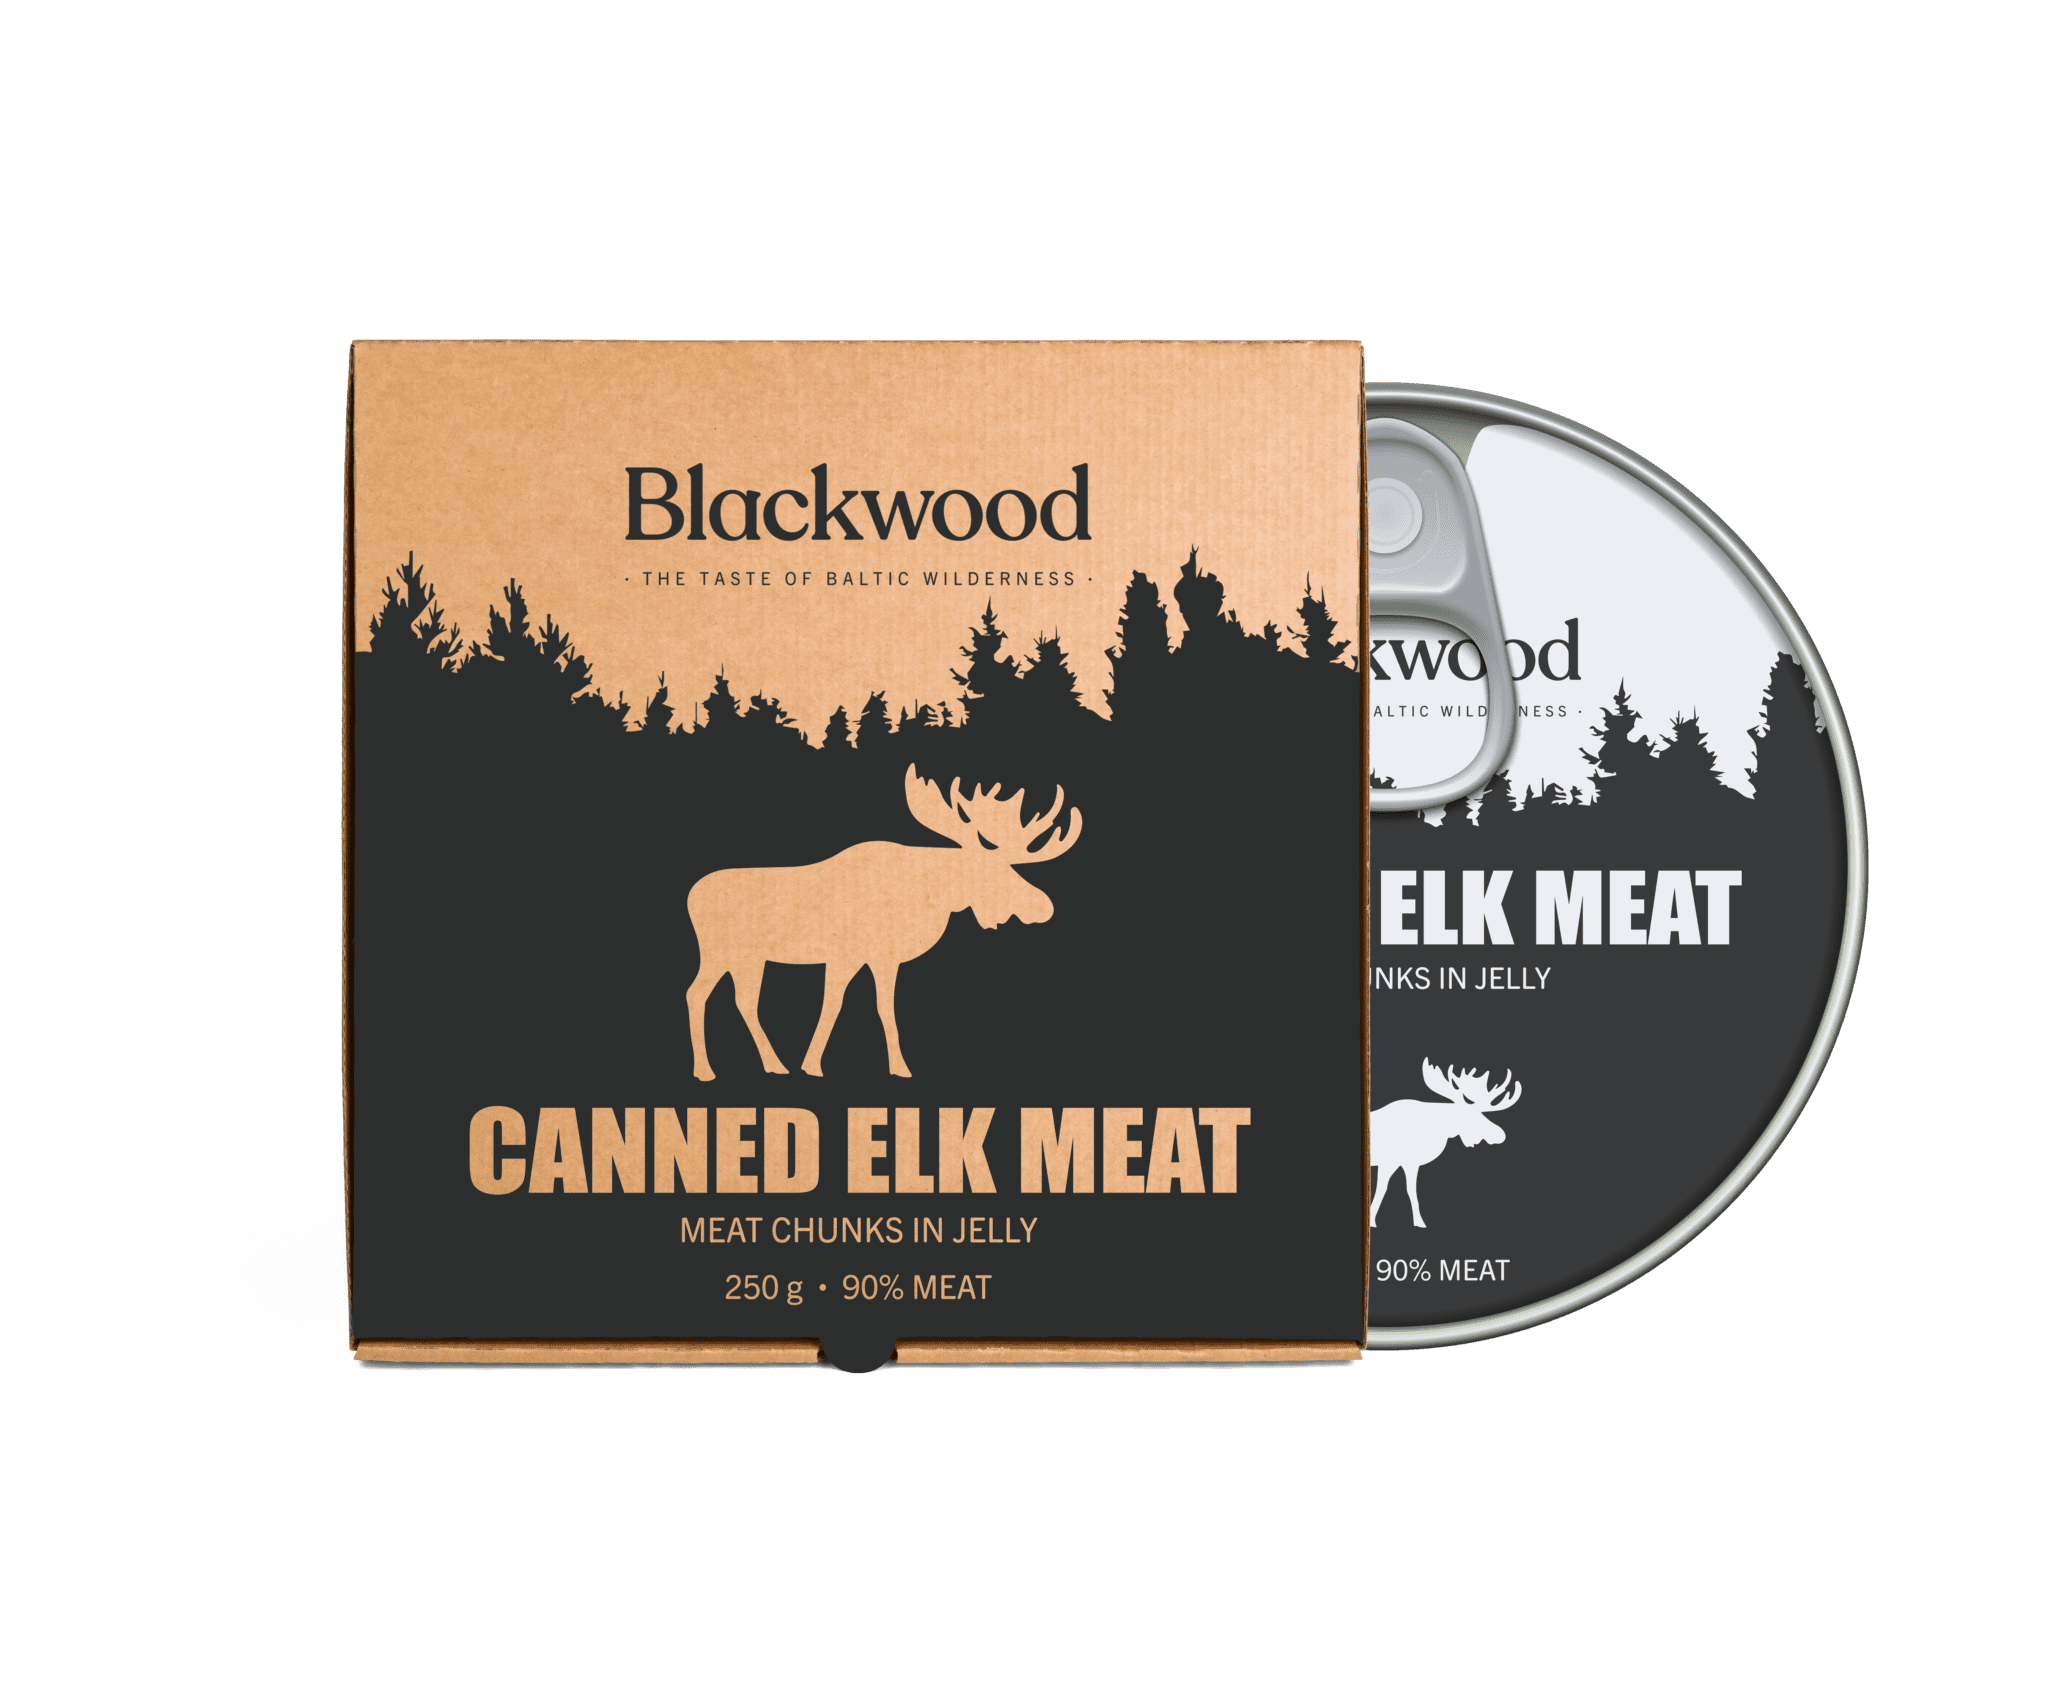 CANNED ELK MEAT, meat chunks in jelly, canned, sterilized, 12g